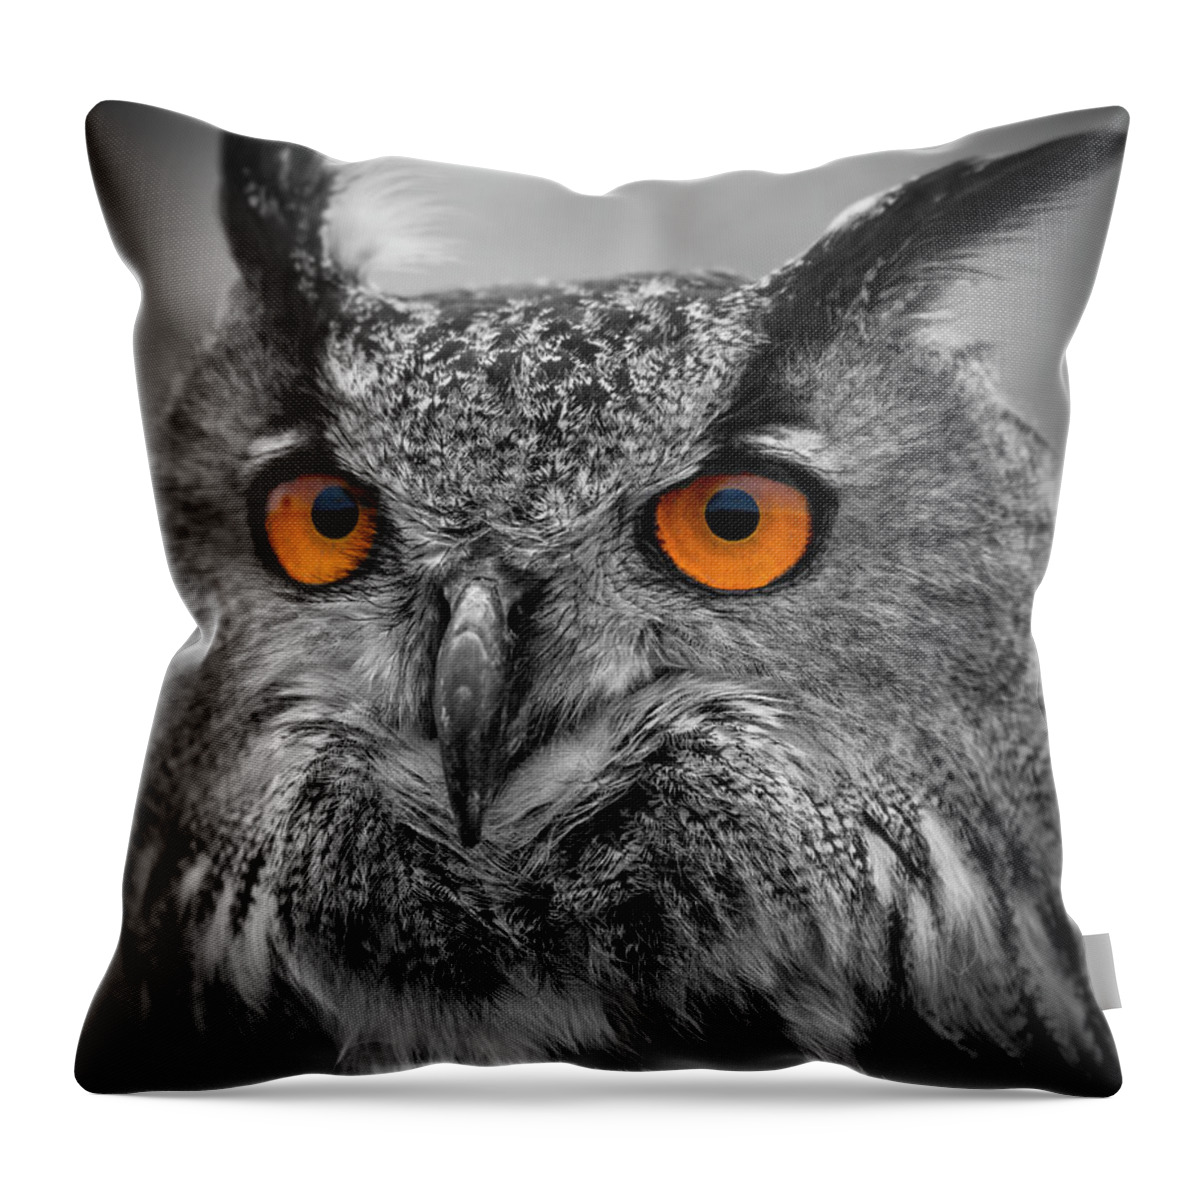 Eagle Owl Throw Pillow featuring the digital art Portrait Of A Eagle Owl by Marjolein Van Middelkoop